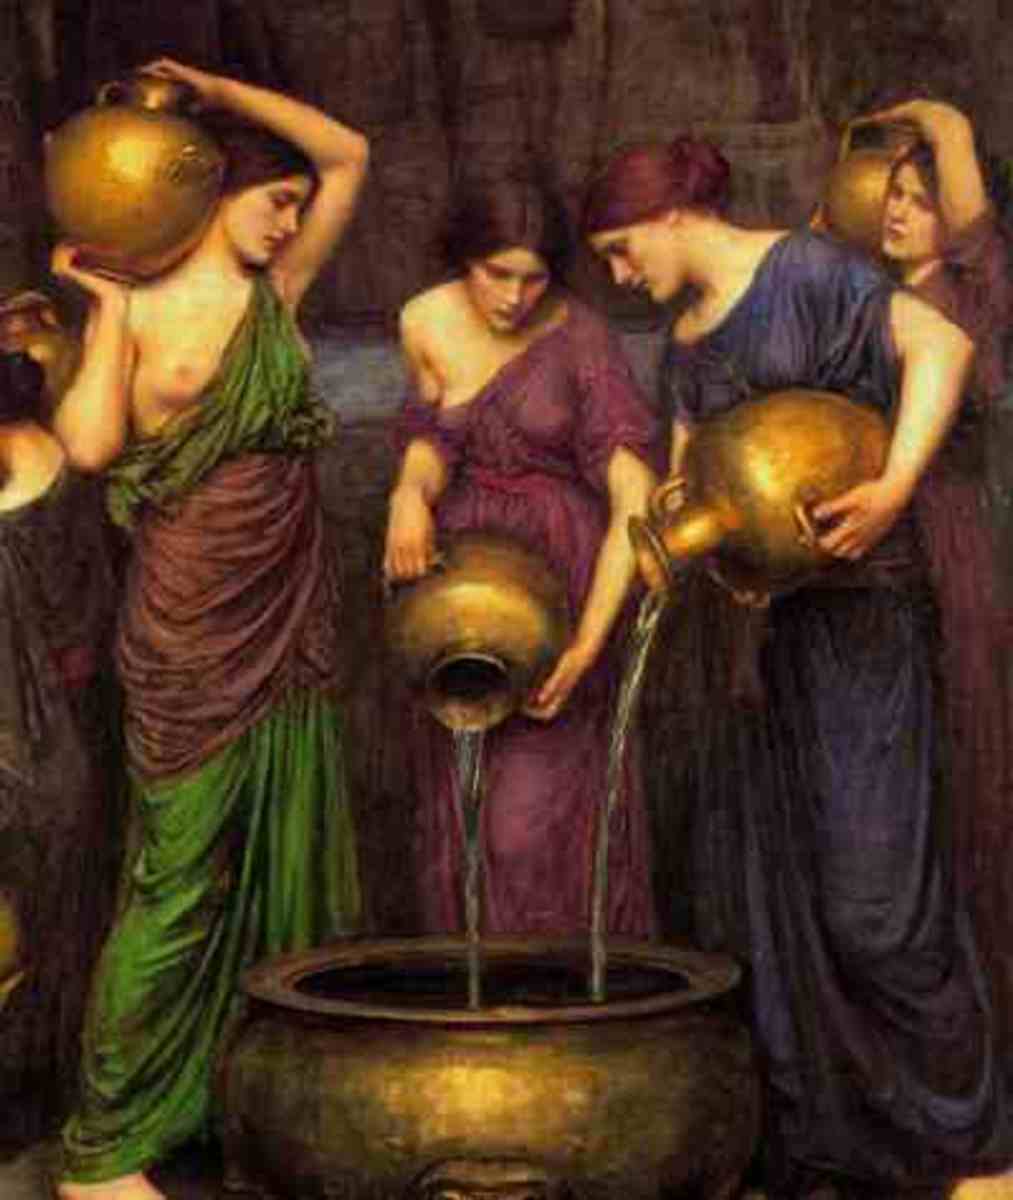 Women making potions in ancient Rome